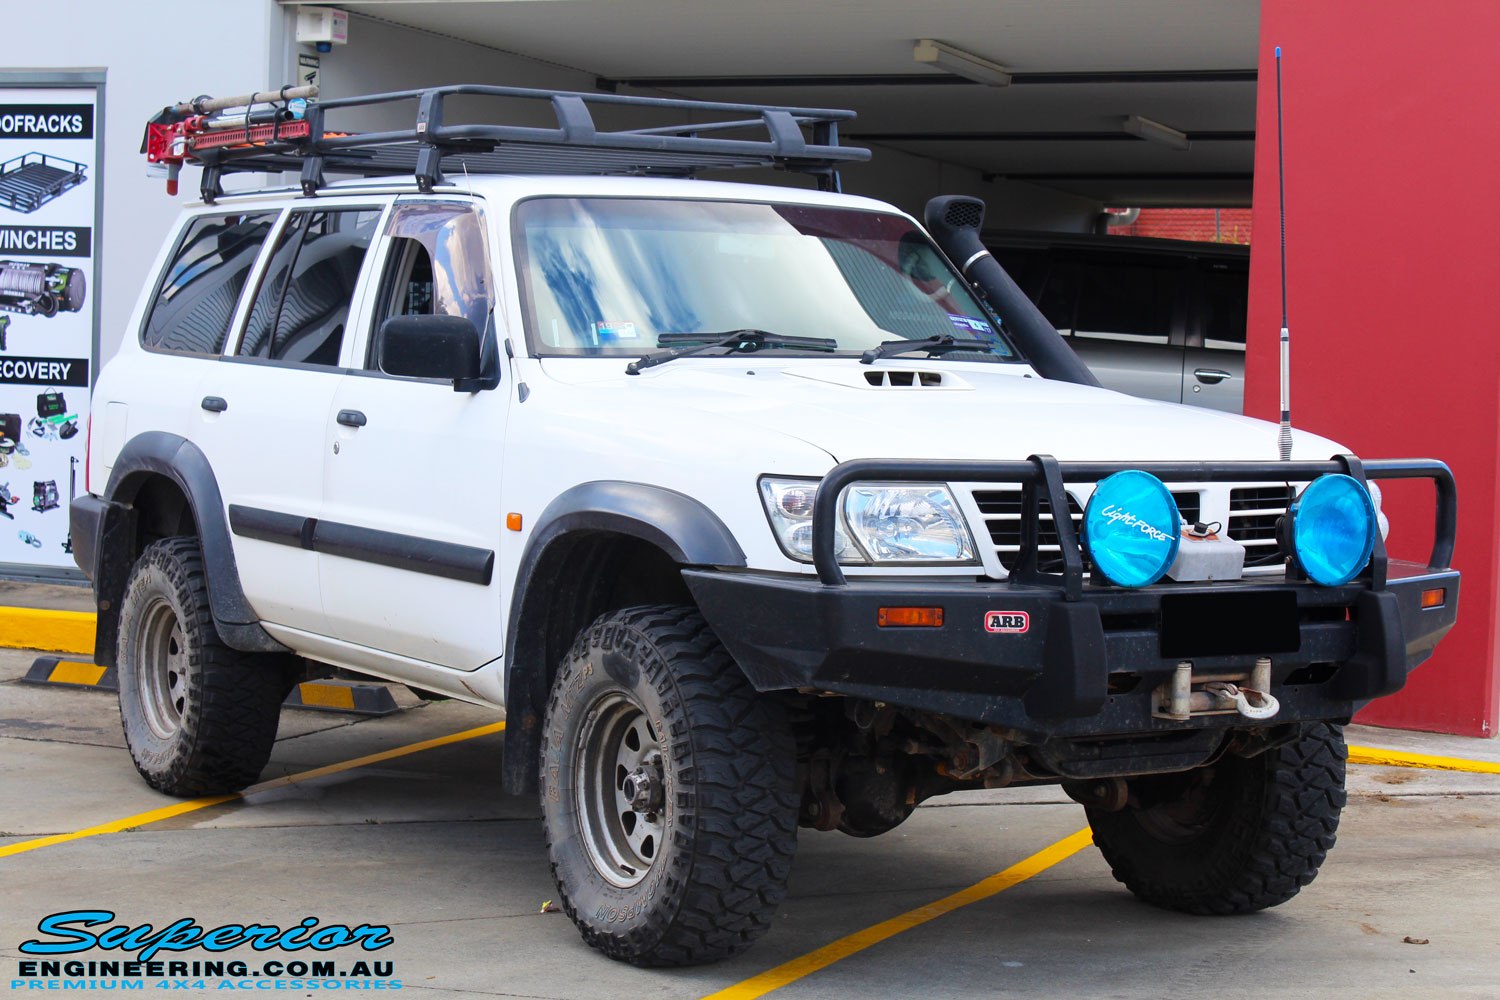 Right front side view of a Nissan GU Patrol Wagon in White On The Hoist @ Superior Engineering Deception Bay Showroom